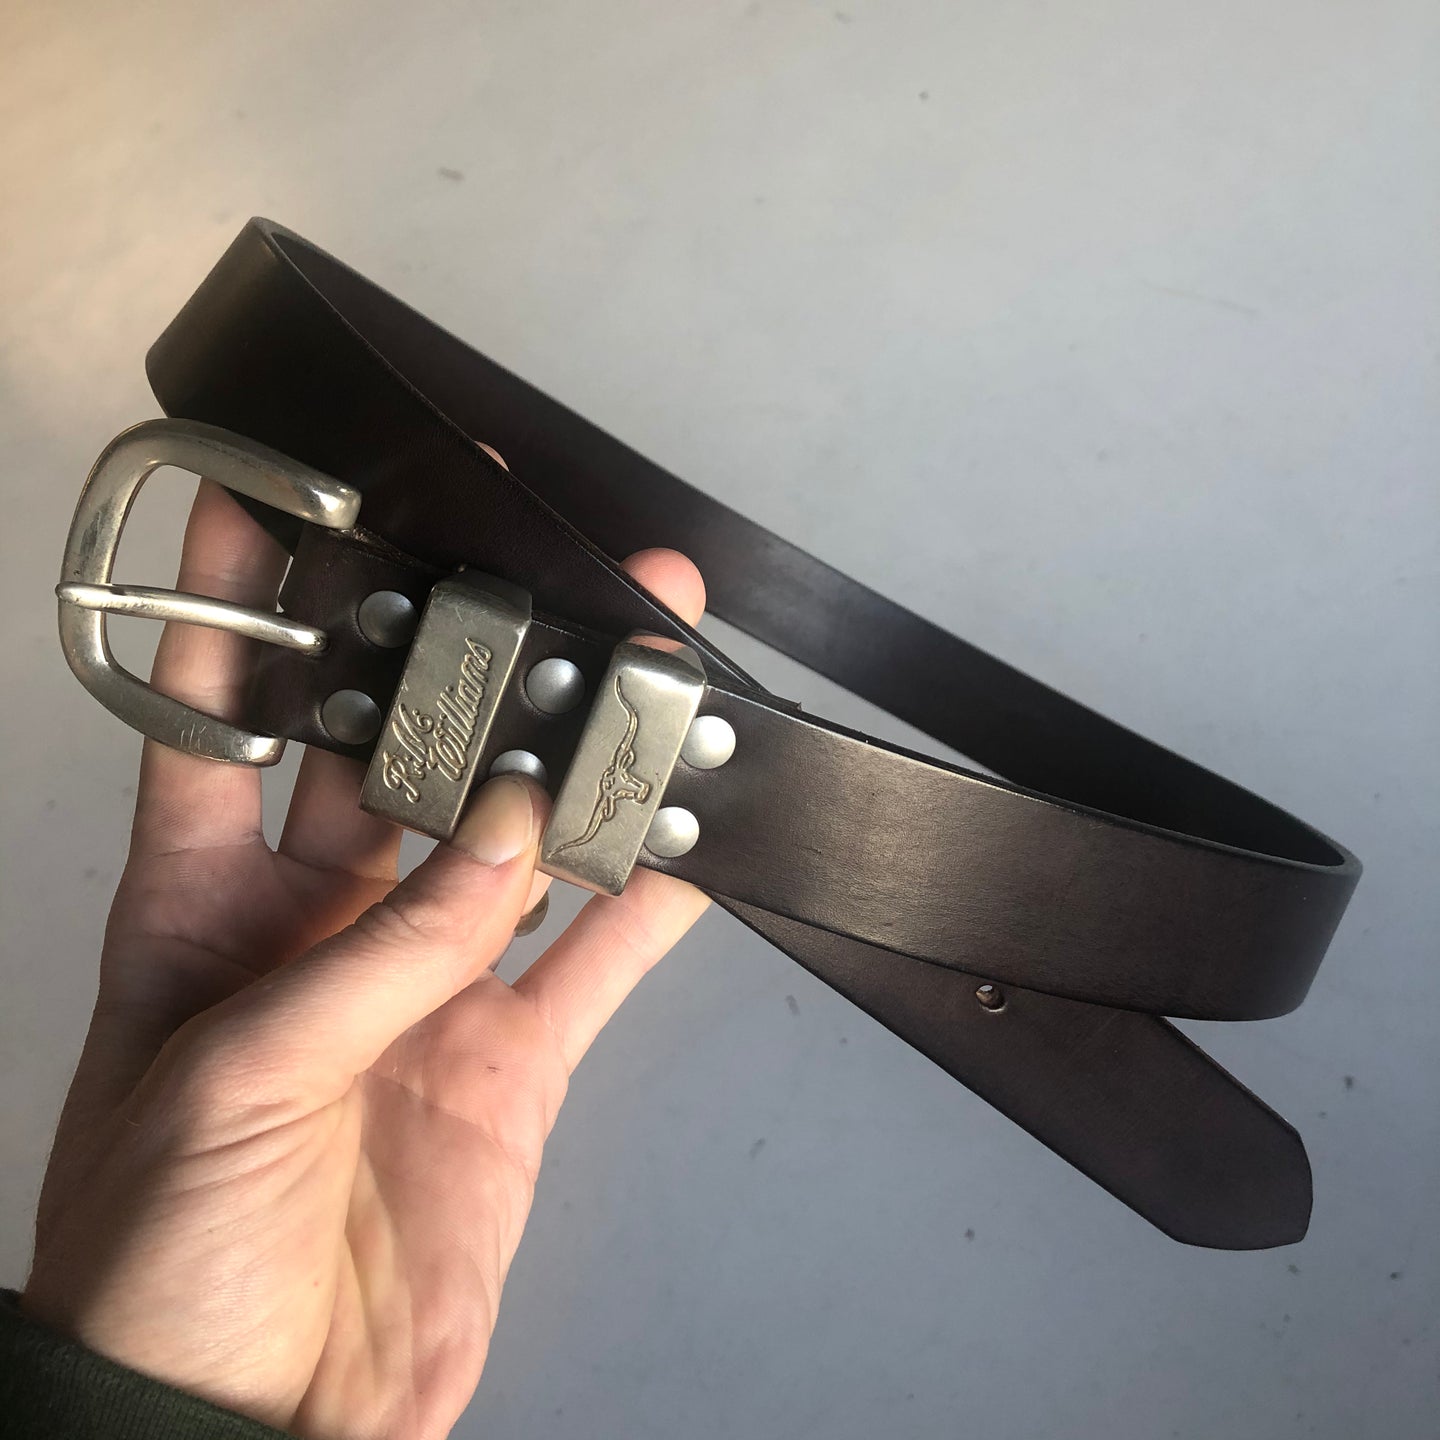 “Bring your own buckle” belt